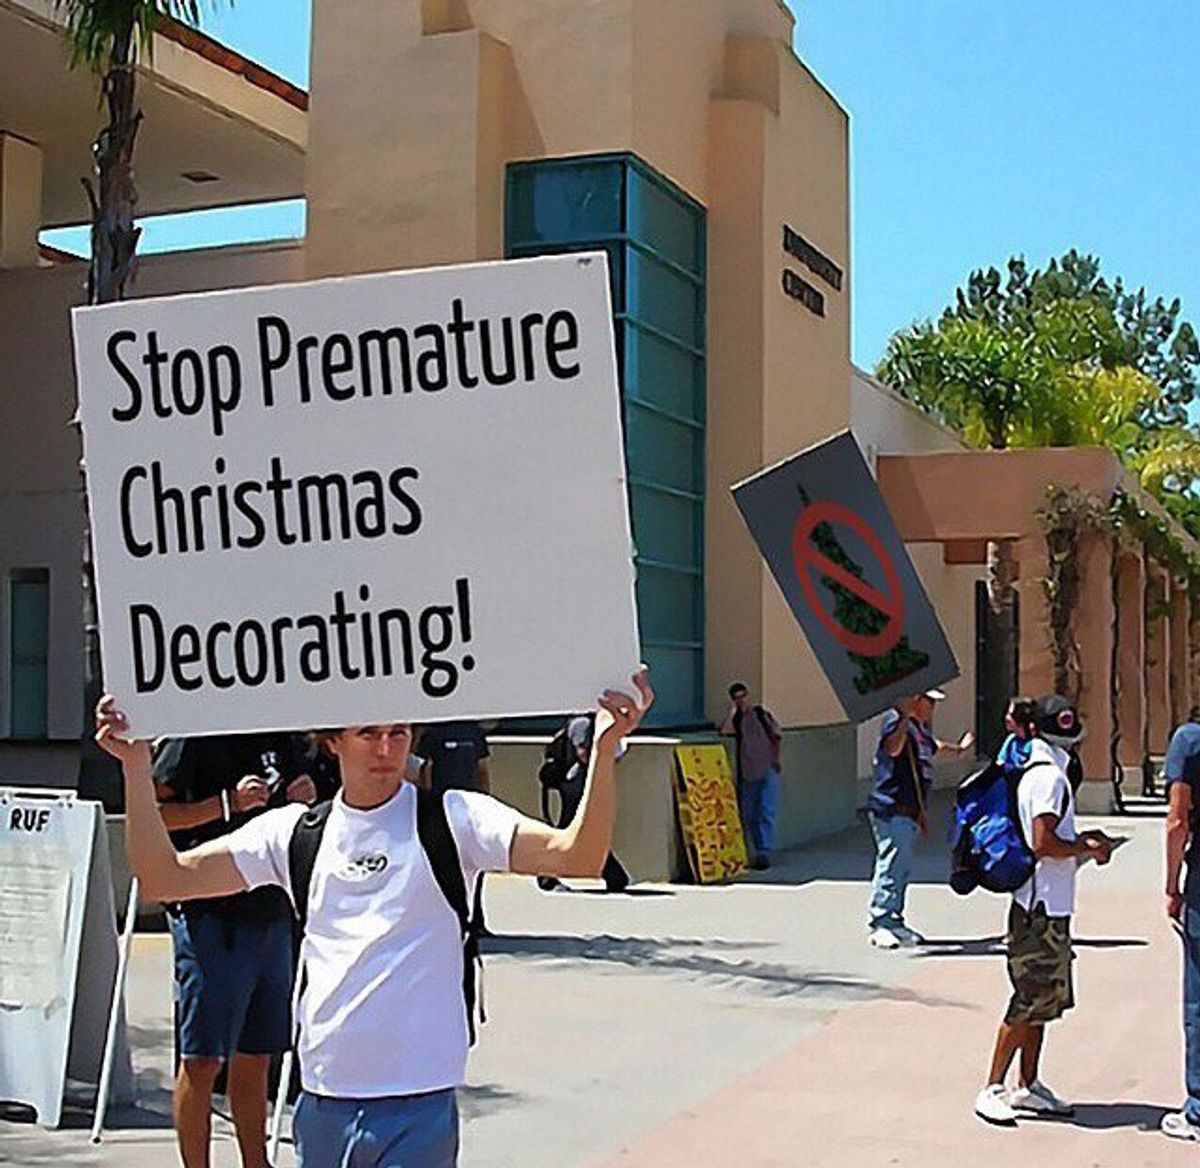 Addressing The Vice And Sin Of Premature Christmas Decorating